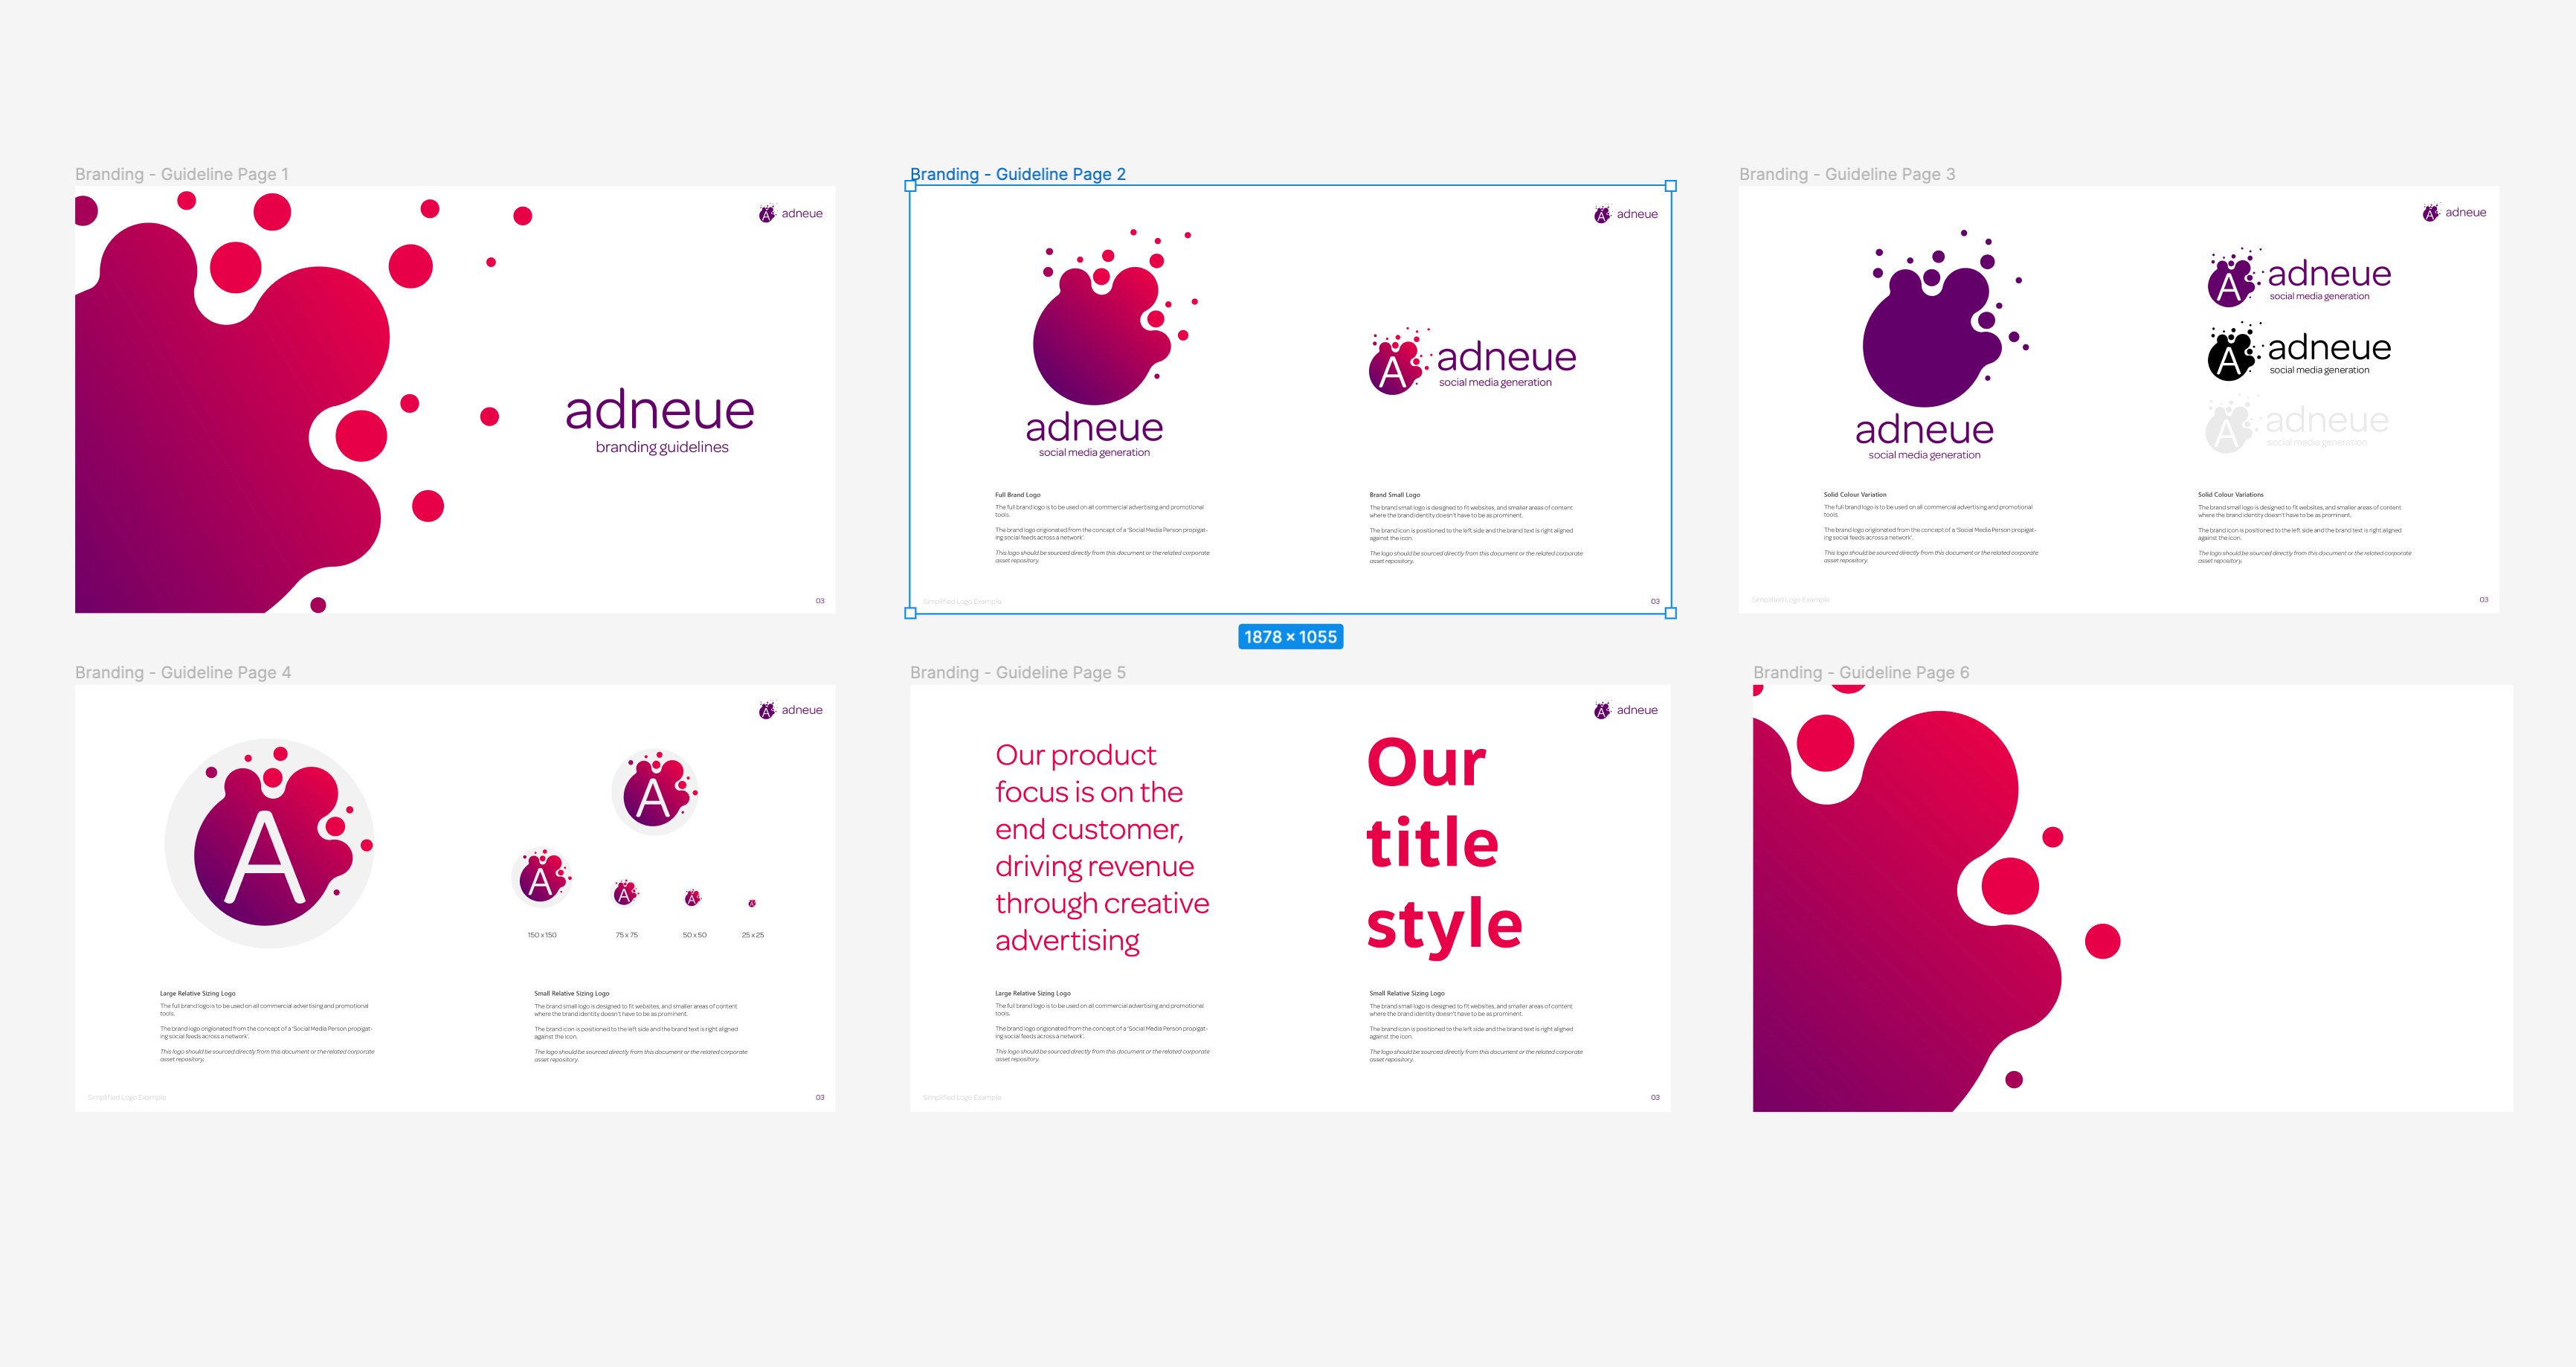 Adneue branding guidelines, all 6 pages shown together